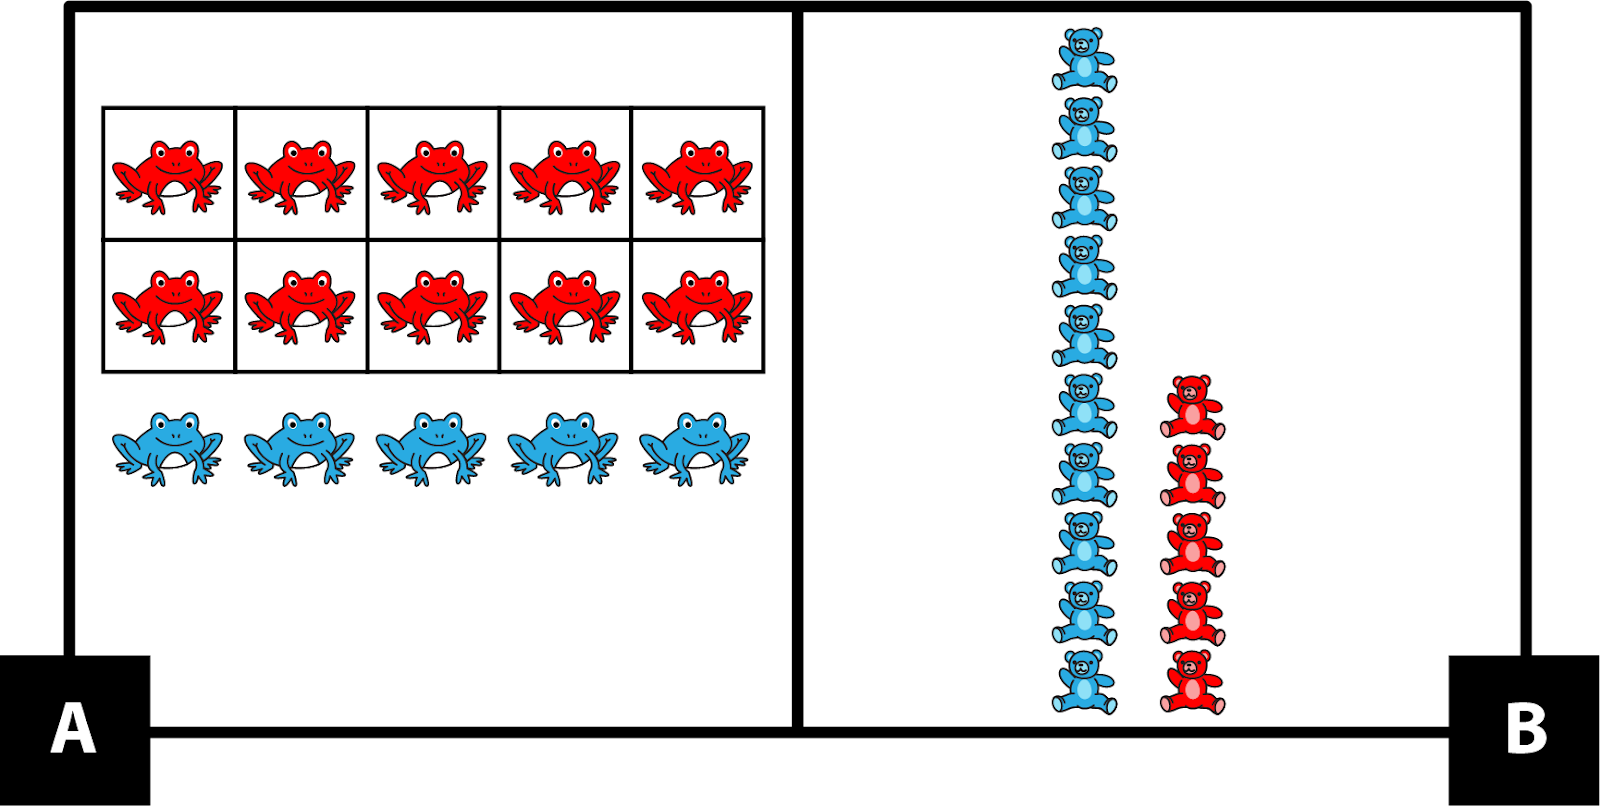 A. shows a 10-frame filled with red frogs. A row of 5 blue frogs is below the 10-frame. B. shows a tall line of 10 blue teddy bears. Another line of 5 red bears is next to the blue bears.